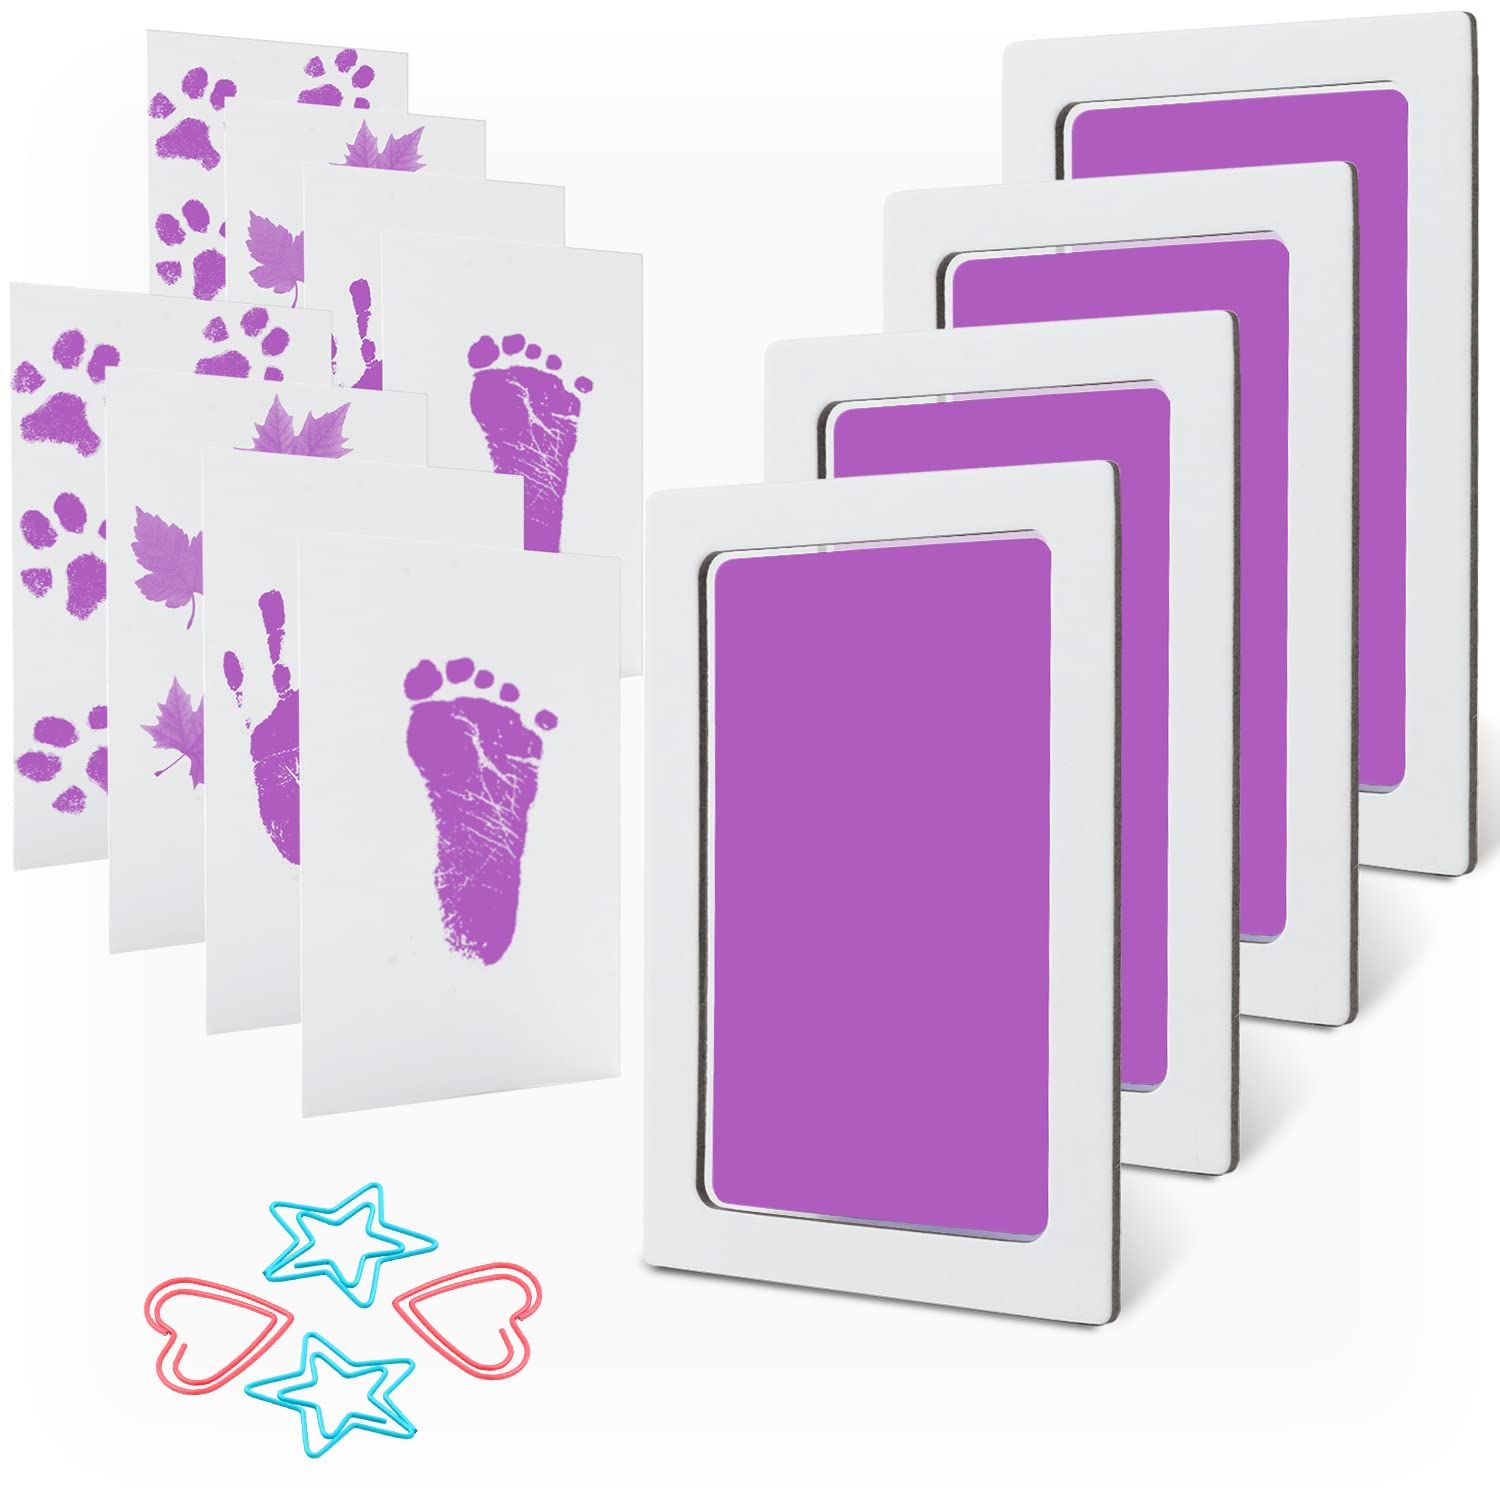 MengNi Baby Footprint Handprint Pet Paw Print Kit Medium Size with 4 Ink Pads and 8 Imprint Cards | Amazon (US)